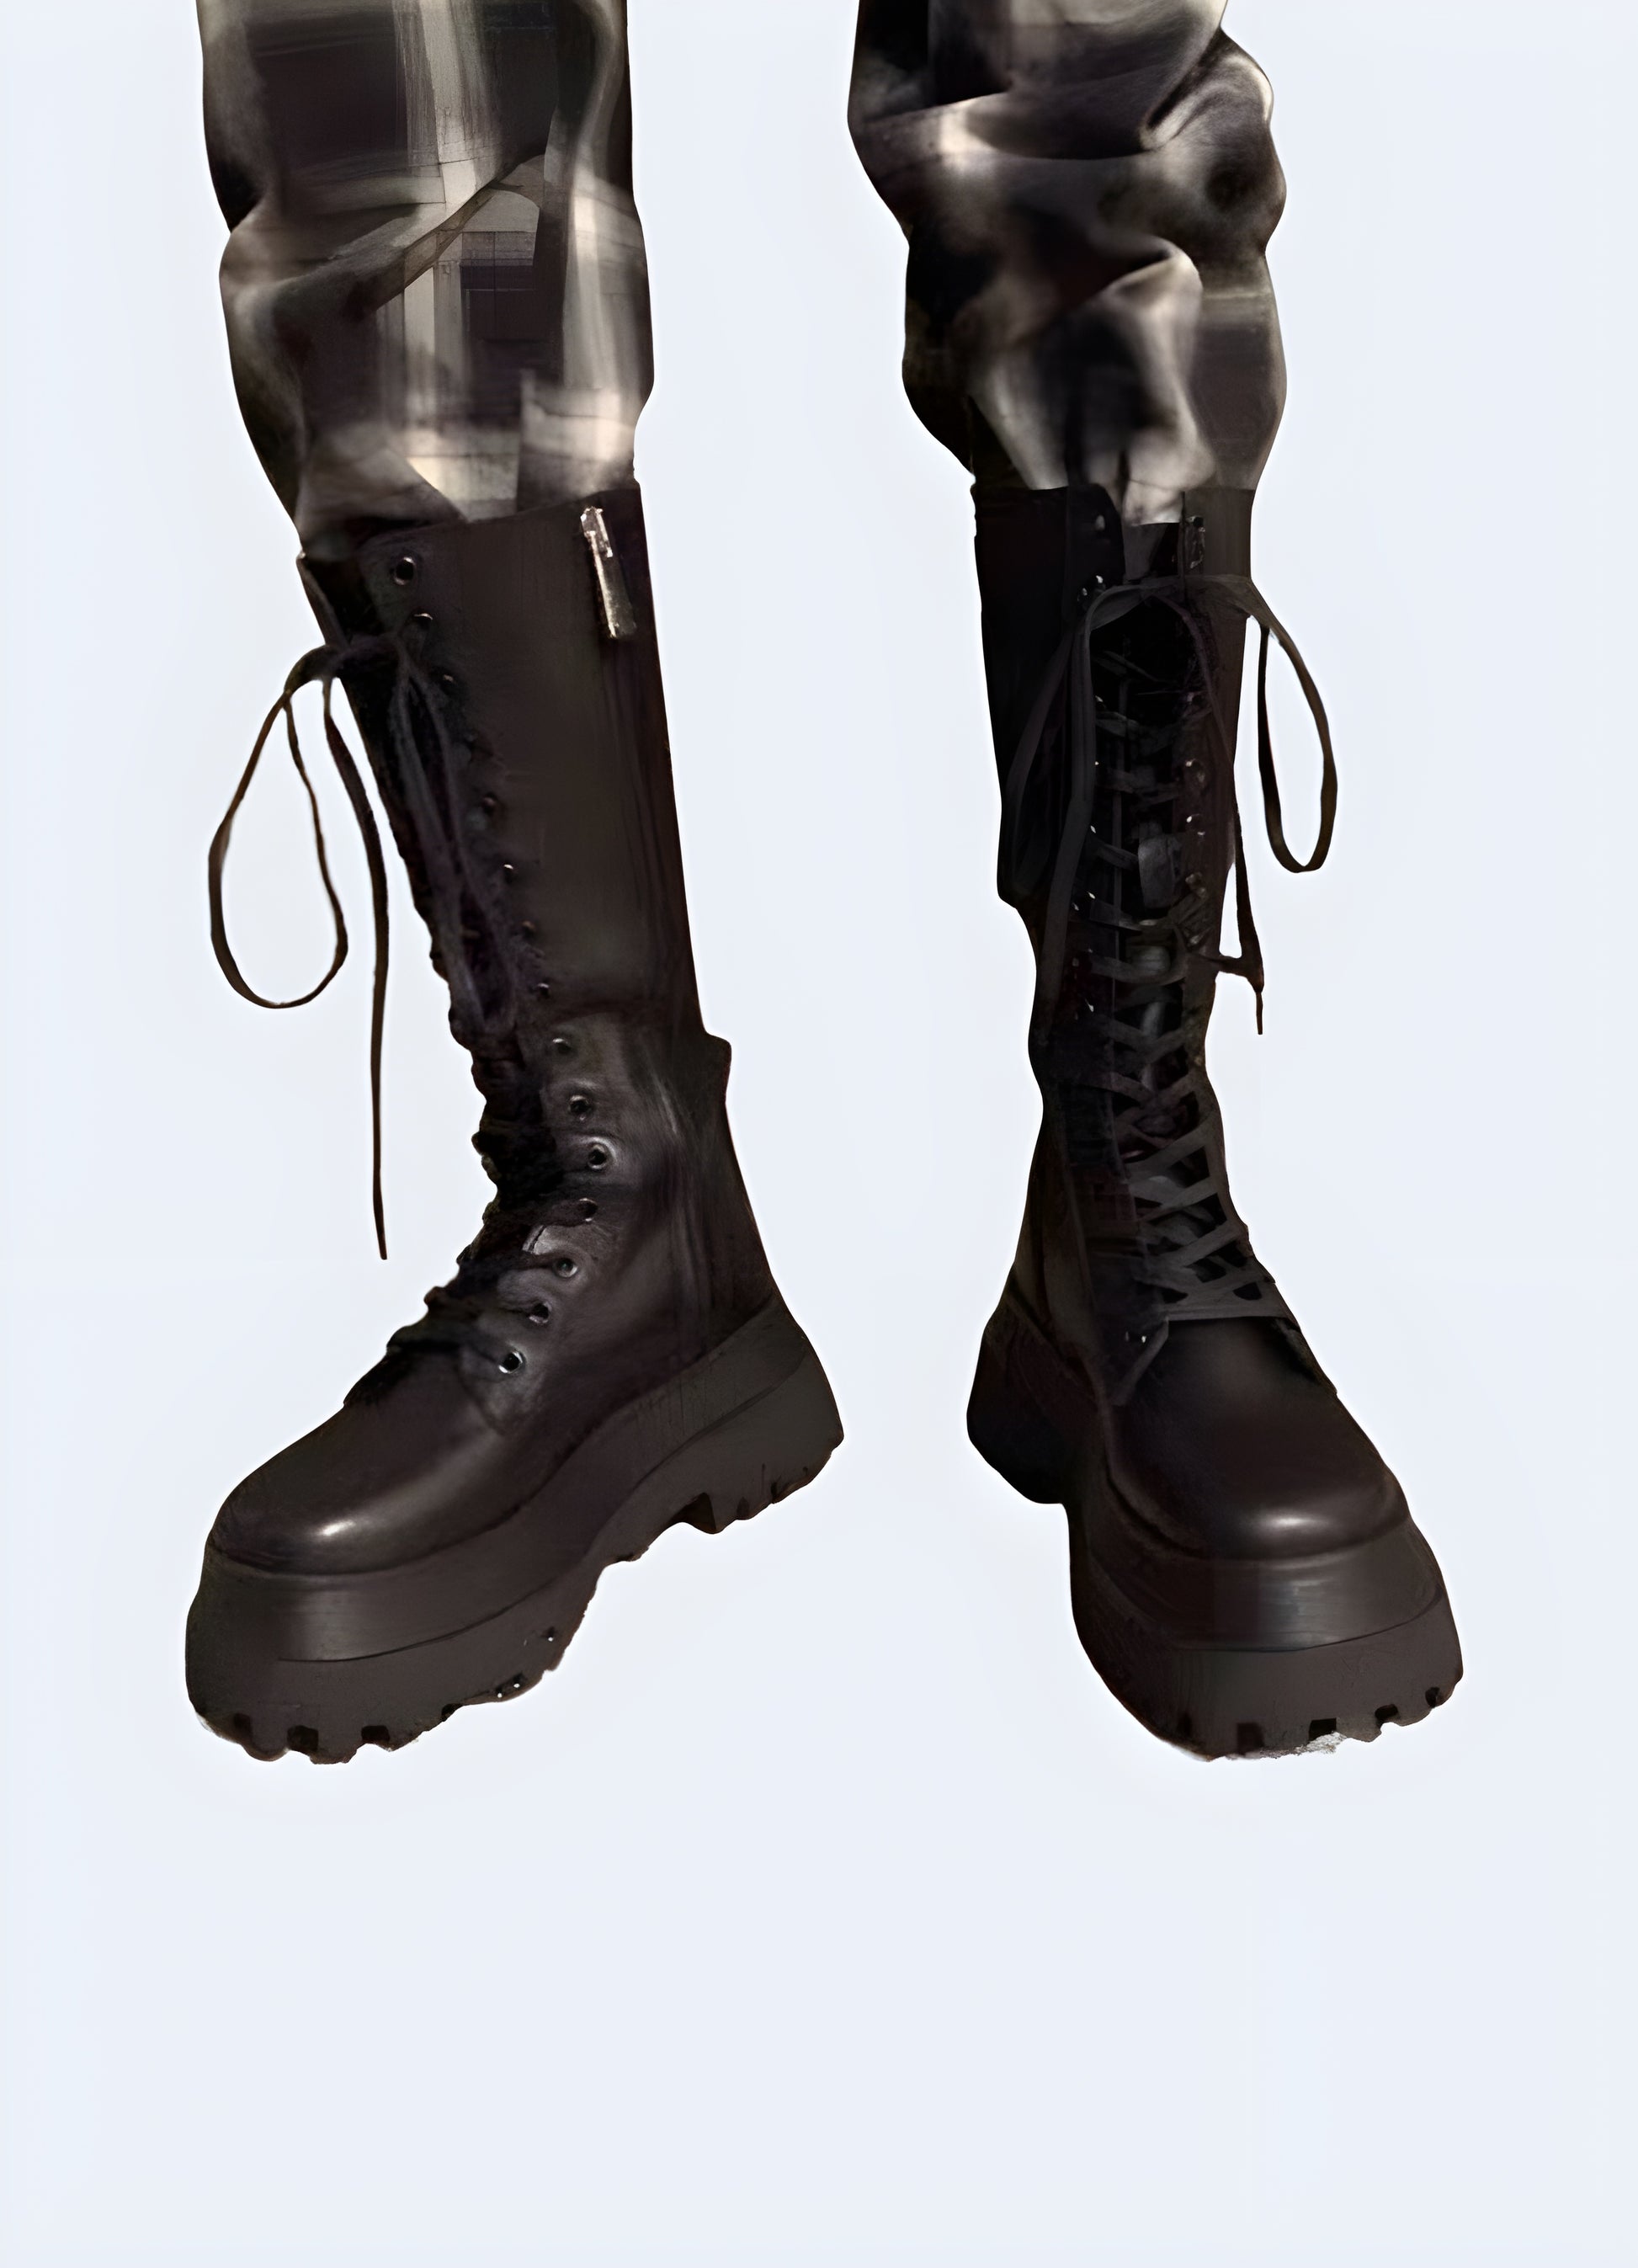 The gothic allure of these tactical boots for women is no less than a defense mechanism against the ordinary.